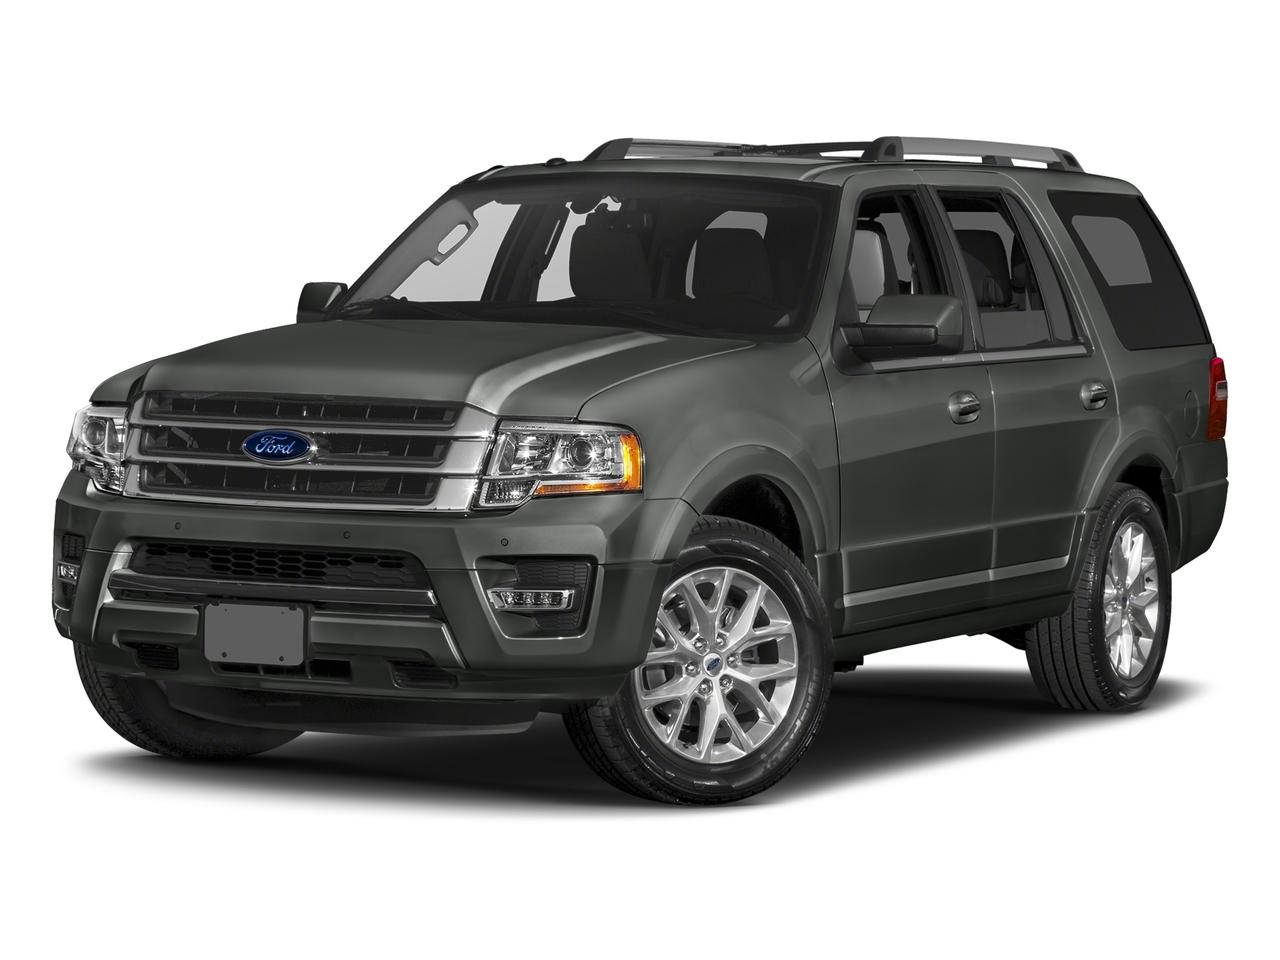 2017 Ford Expedition Vehicle Photo in Plainfield, IL 60586